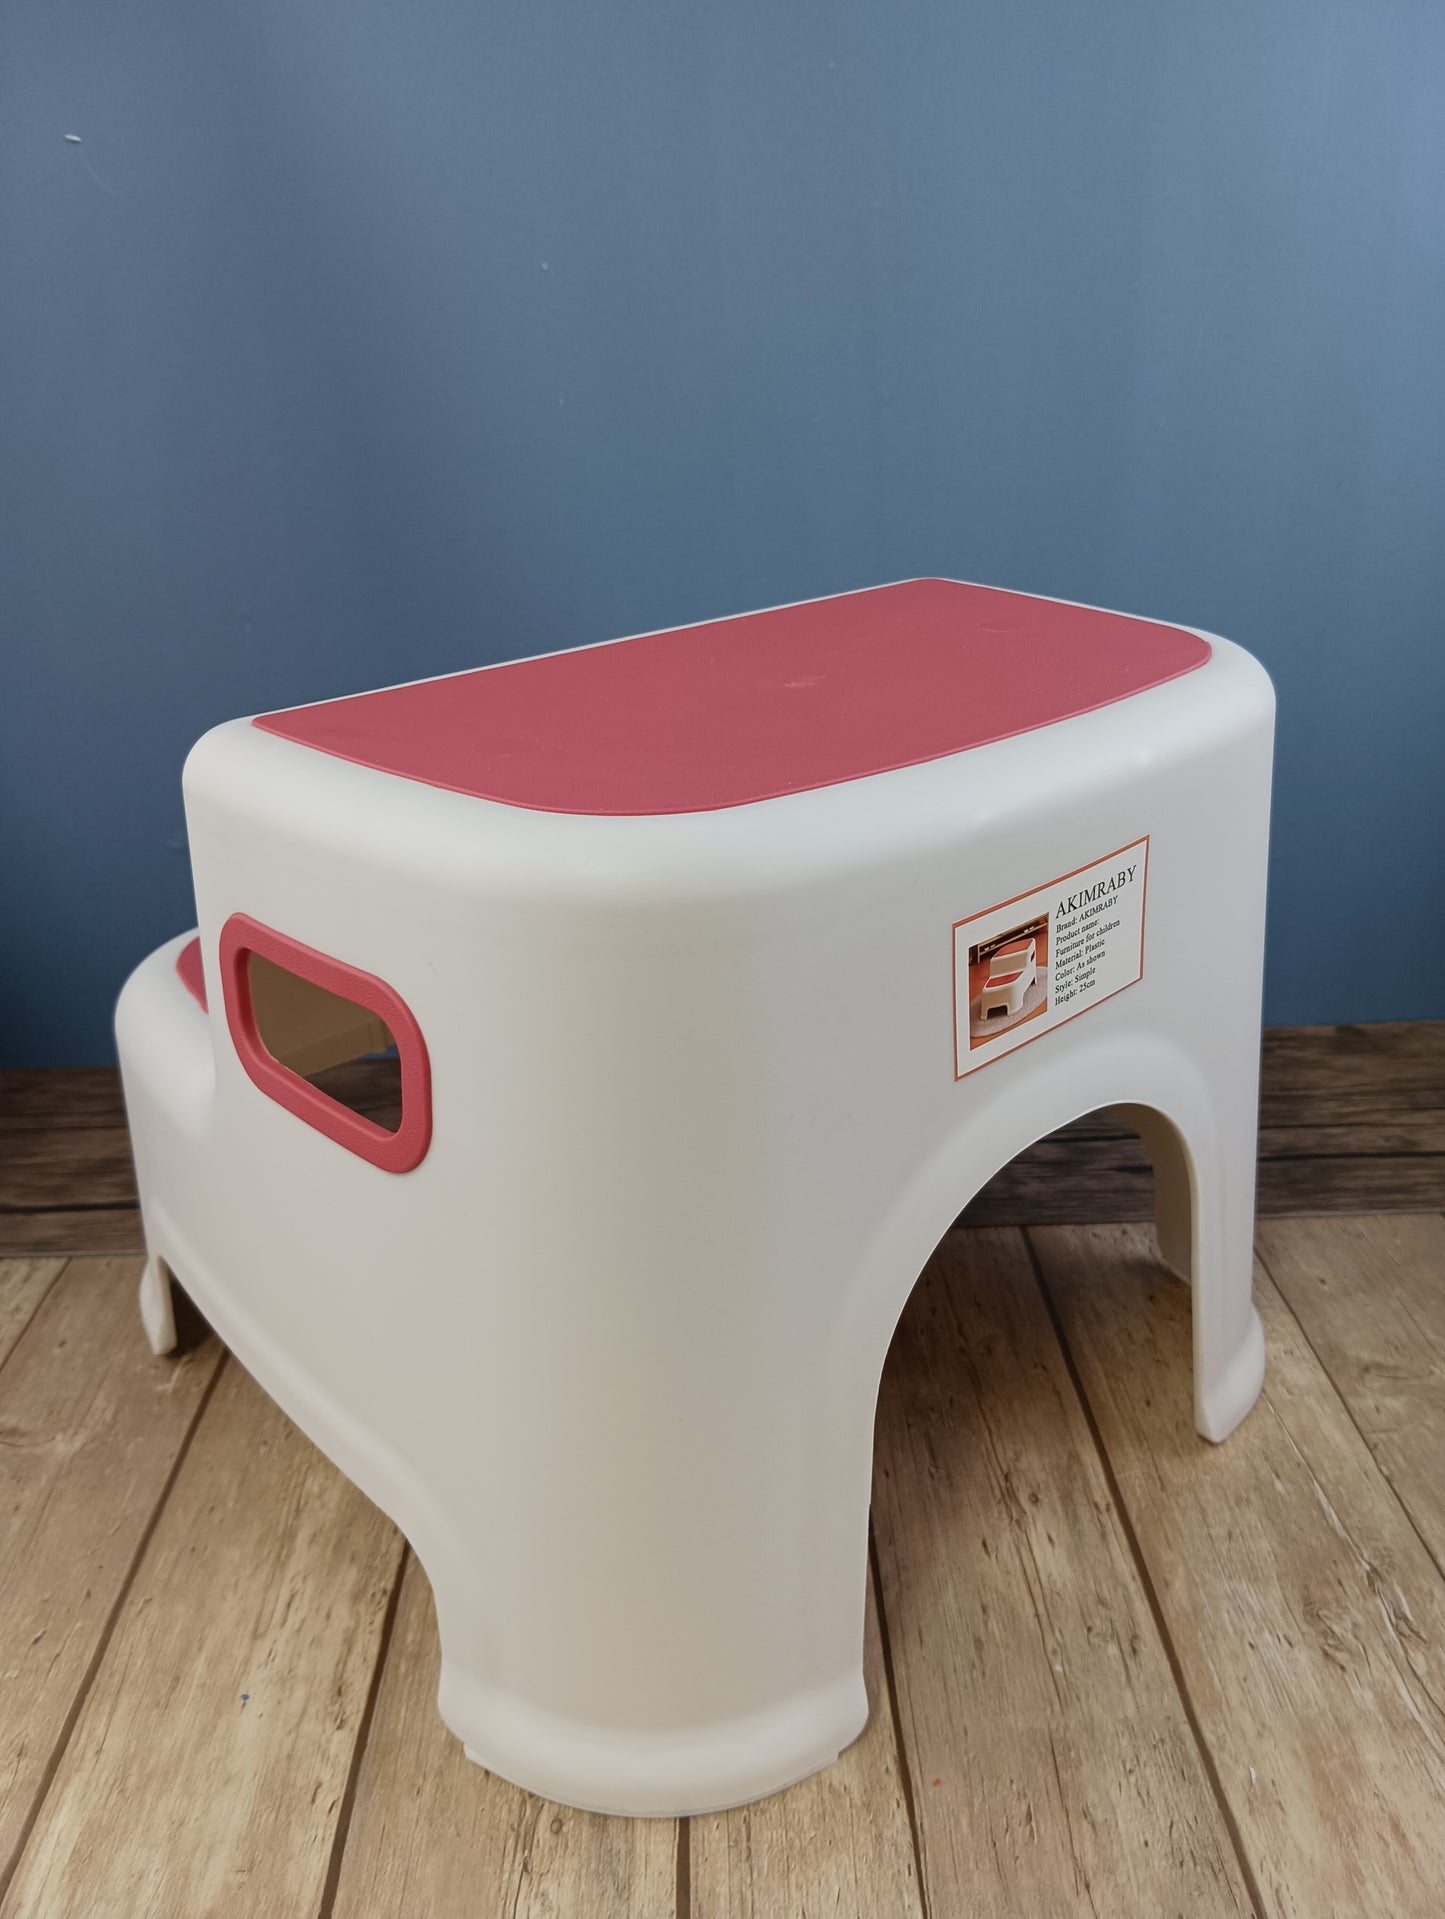 AKIMRABY Children's footstool, baby toilet stool, stepping stool, chair, small bench, hand washing step, child footstool, standing stool